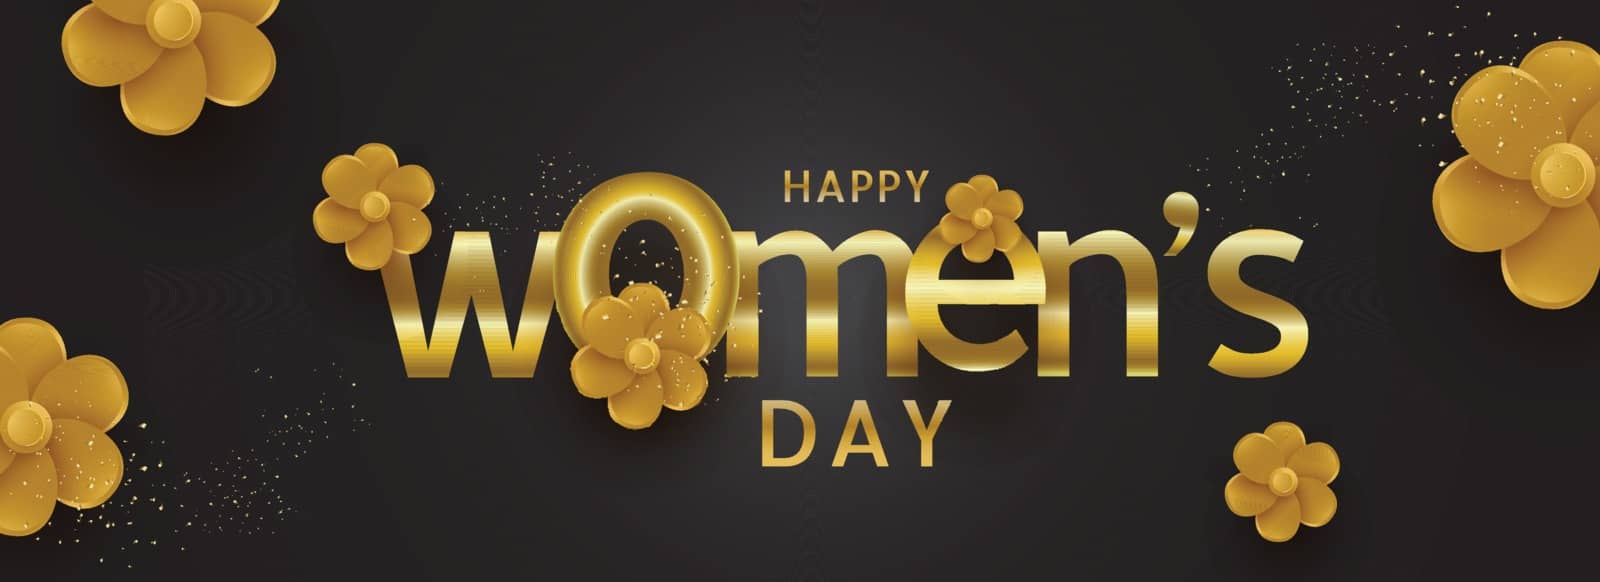 Typography of text happy women's day decorated with brown paper by aispl